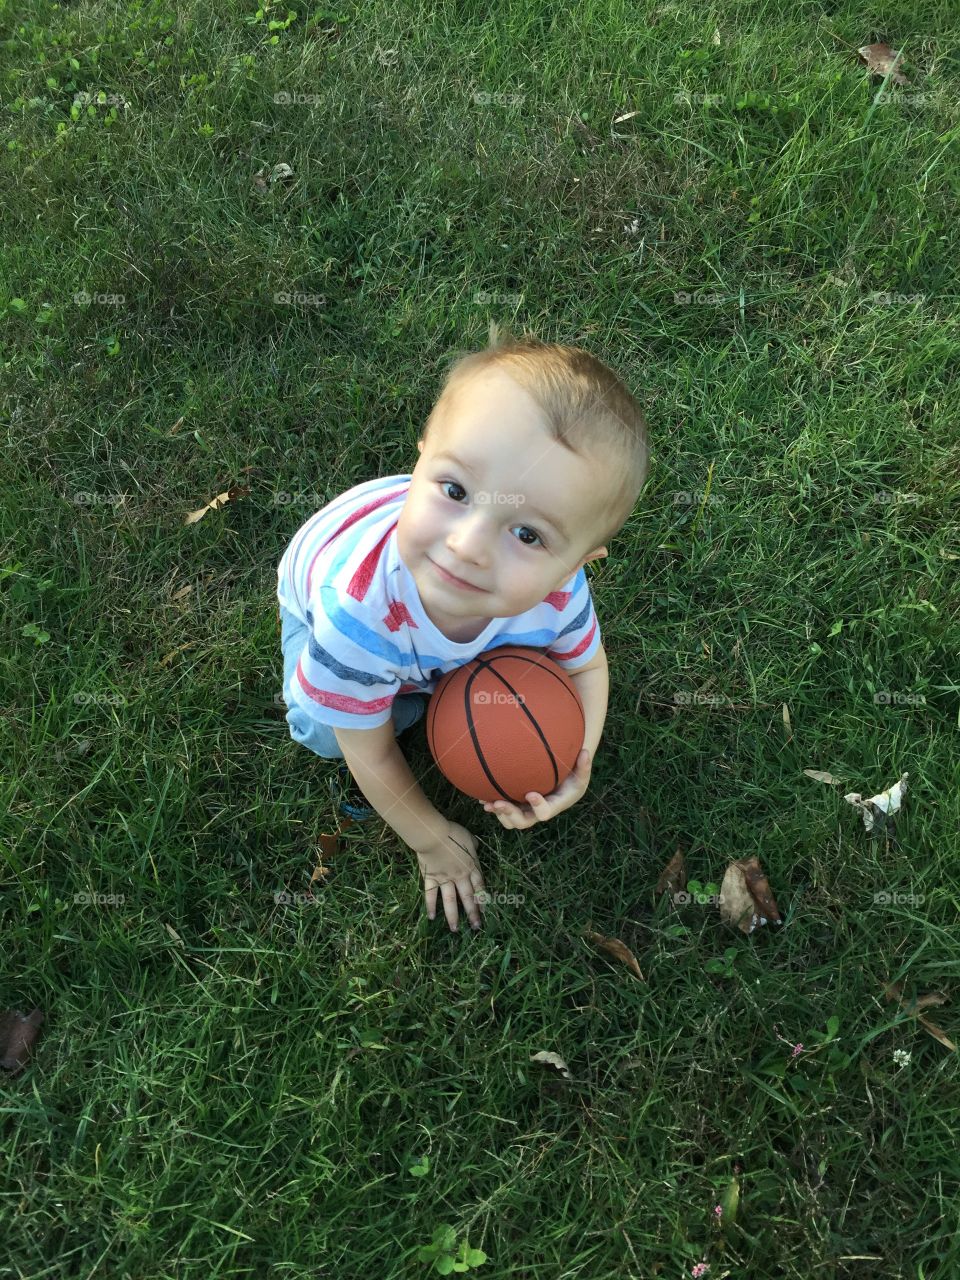 Elevated view of a boy holding basket ball in hand